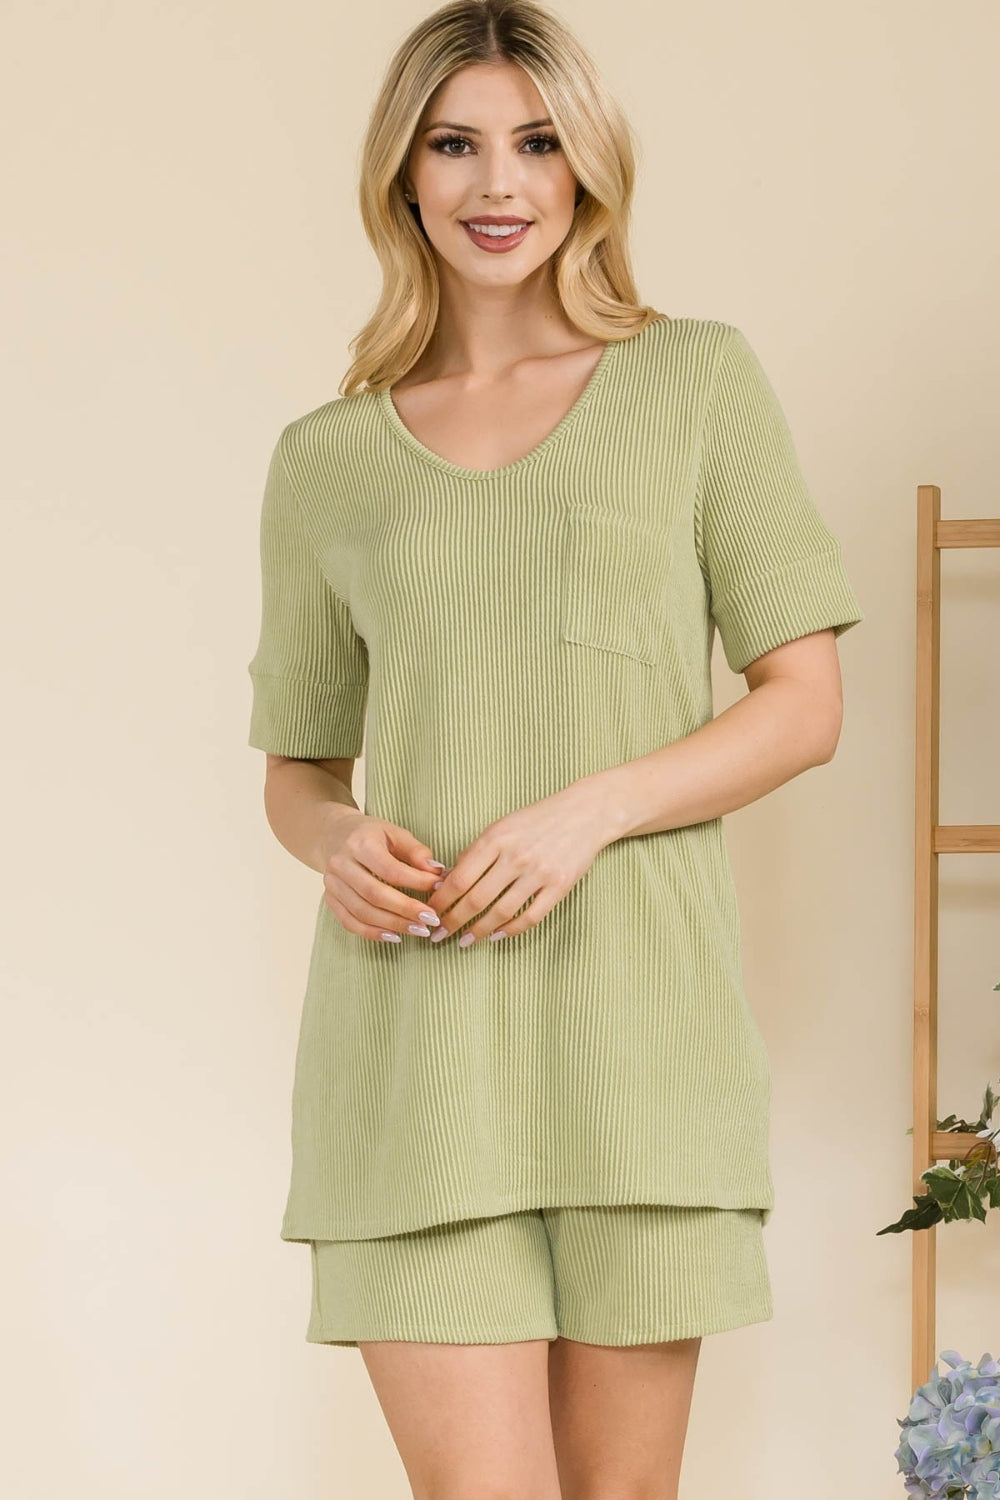 Ultimate Comfort - Ribbed Top and Shorts Set (5 Colors) - Joy & Country